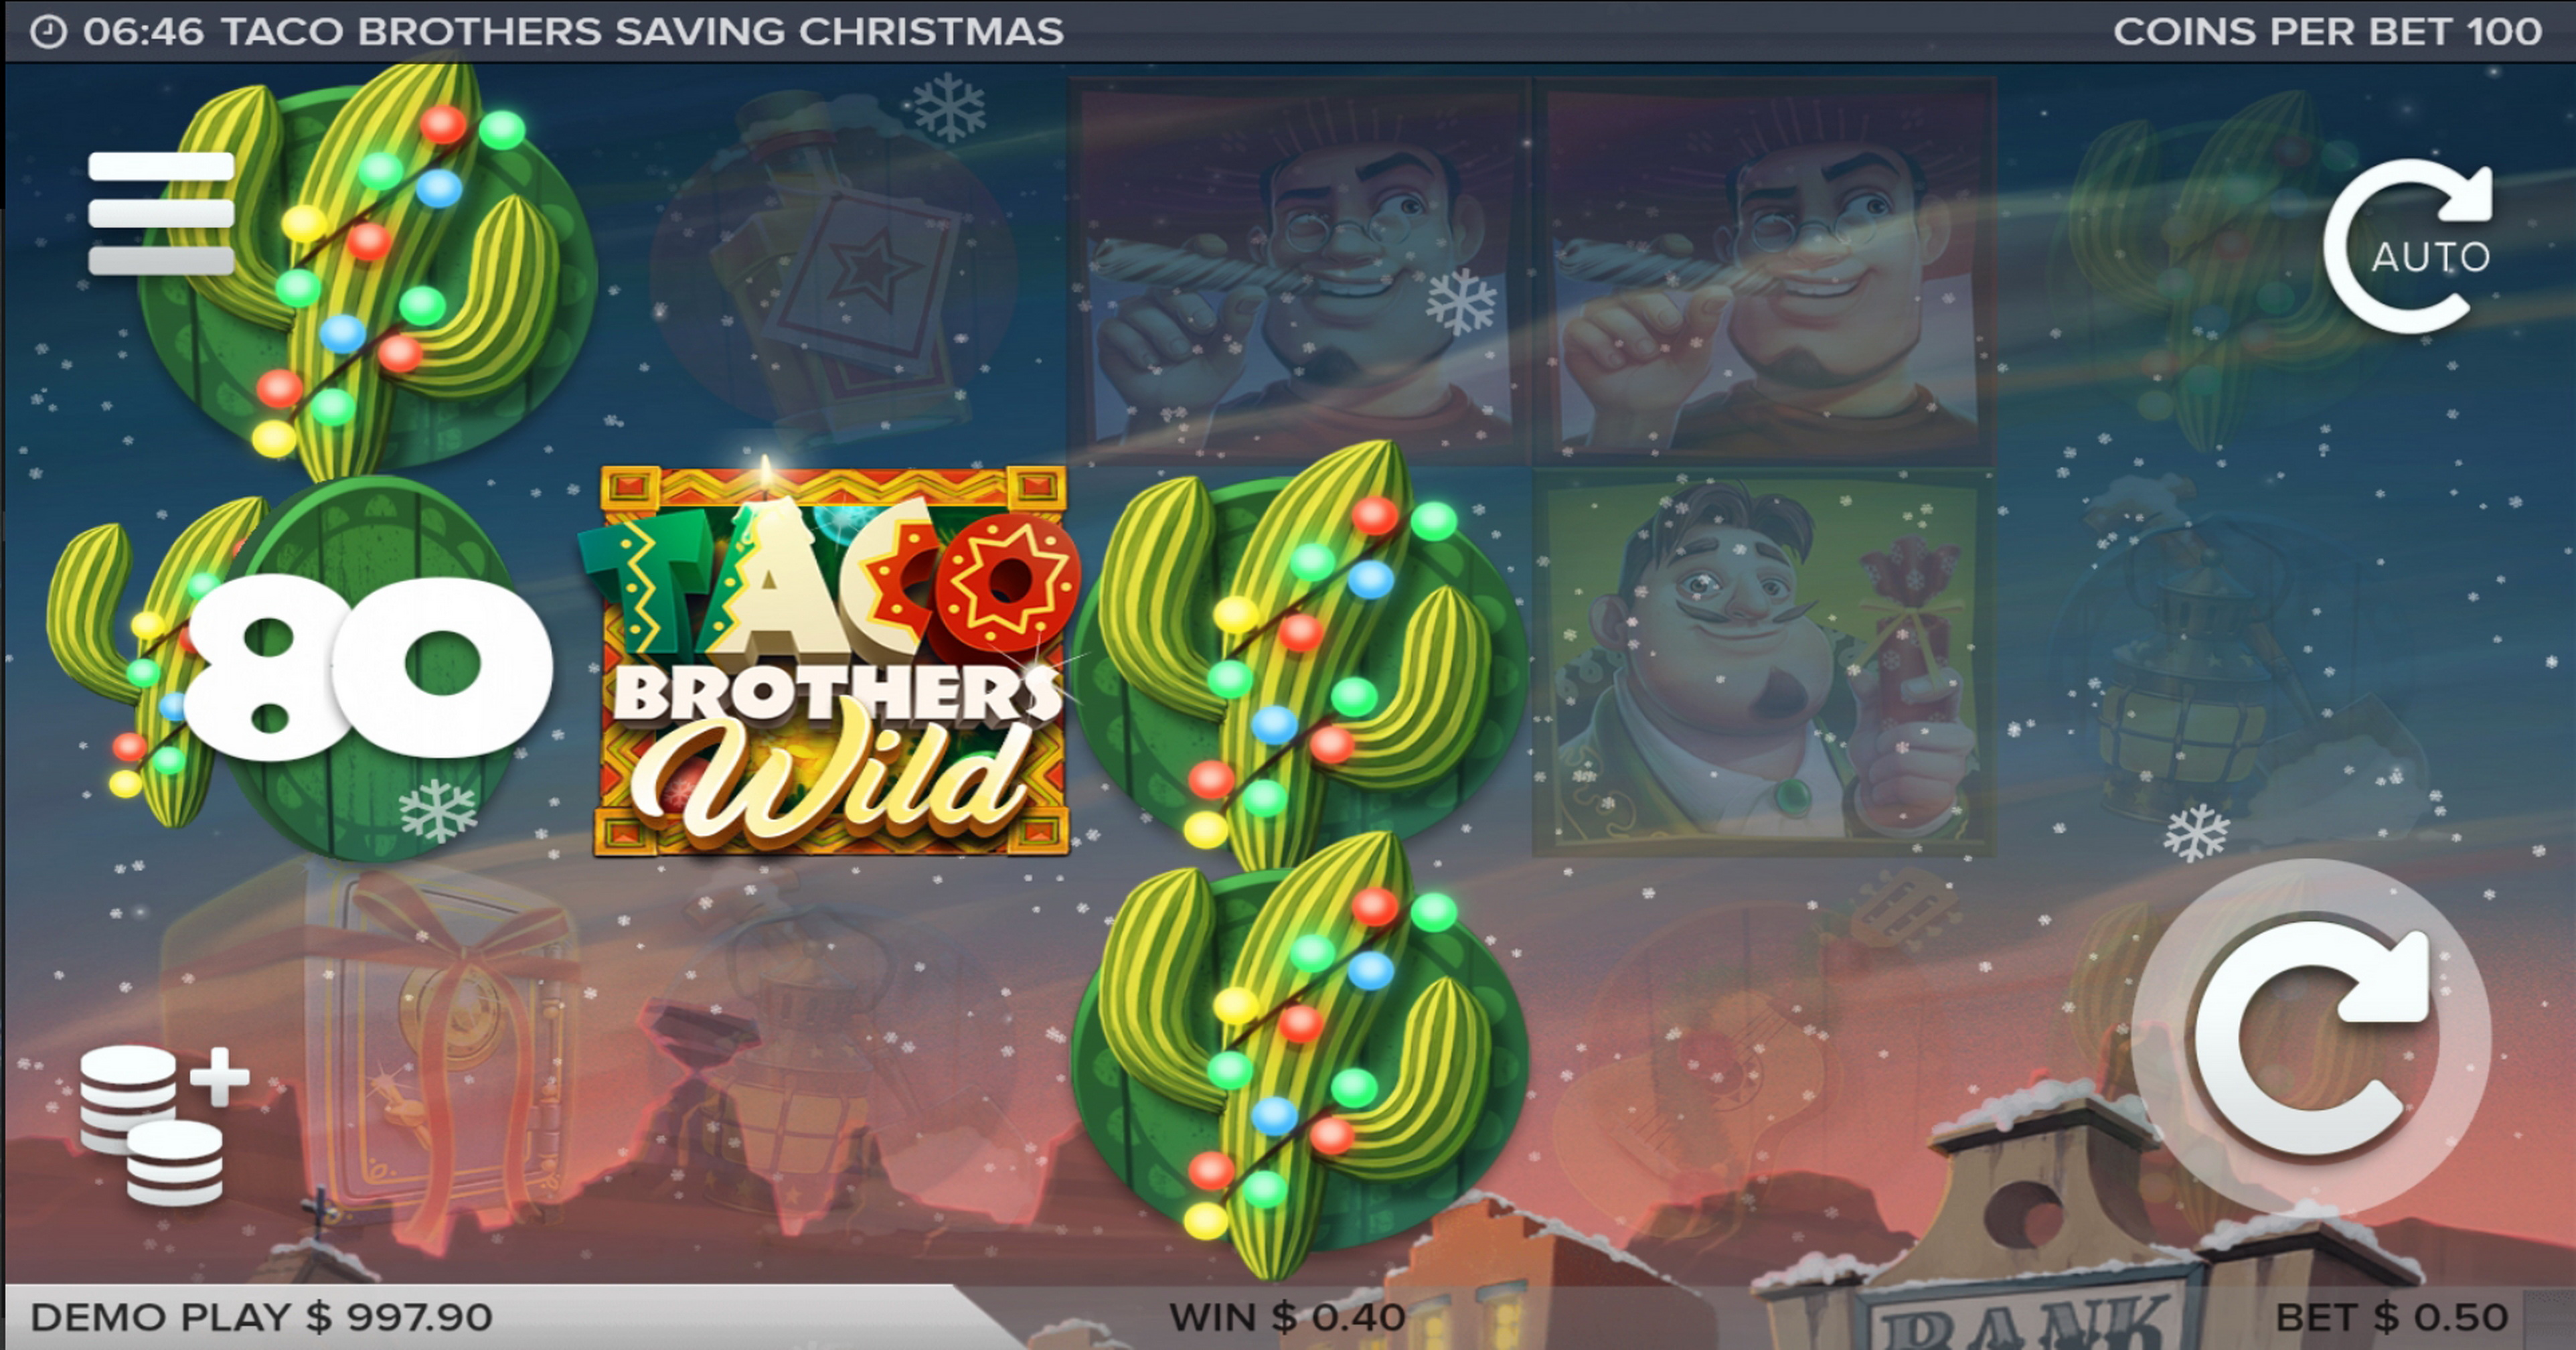 Win Money in Taco Brothers Saving Christmas Free Slot Game by ELK Studios